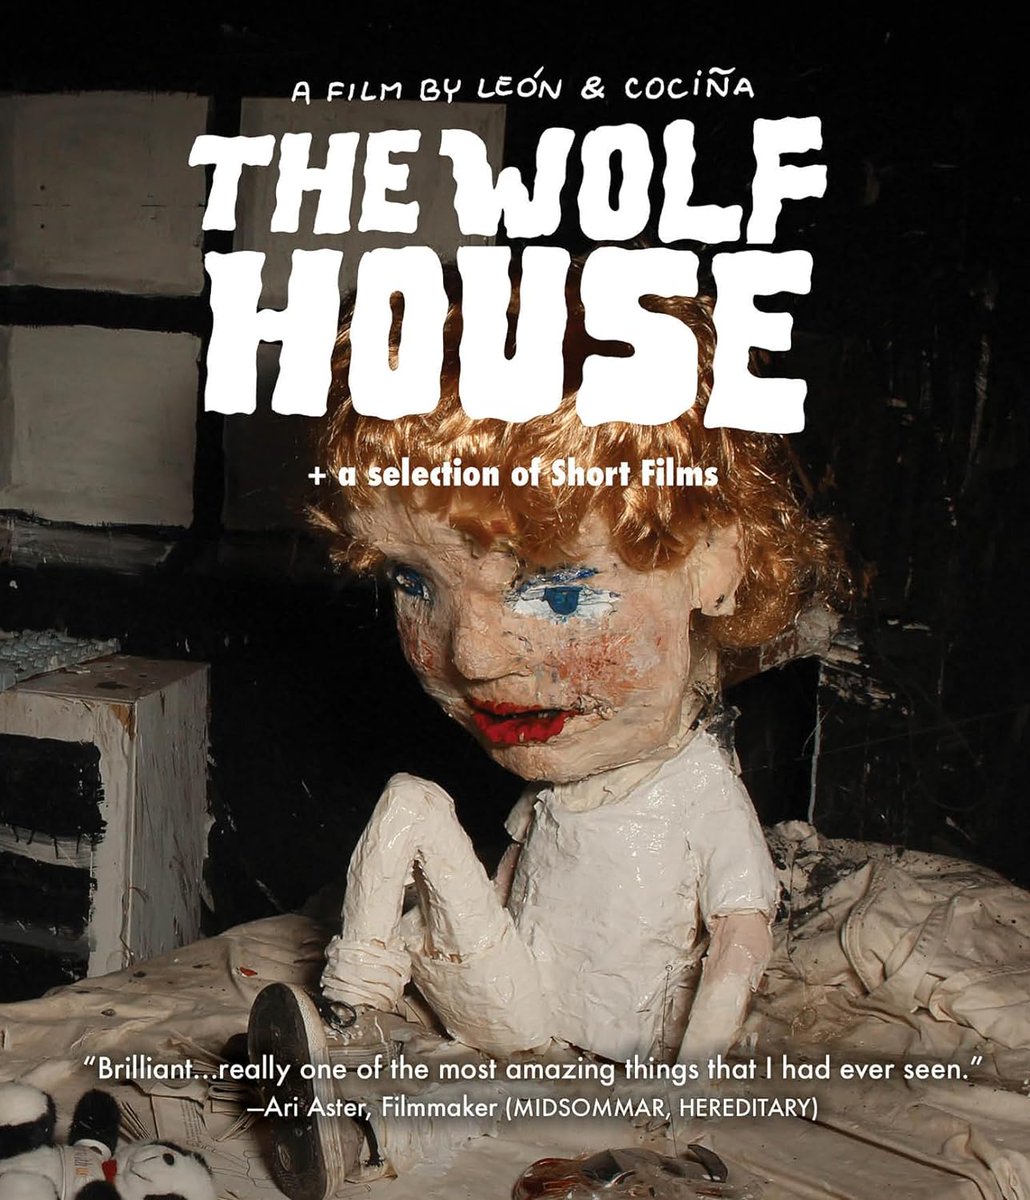 The acclaimed animated horror film THE WOLF HOUSE (2018) directed by Cristóbal León & Joaquin Cocina has been released on Blu-ray entertainment-factor.blogspot.com/2024/05/the-wo… #bluray #animation #thewolfhouse #horror #horrormovies #leonandcocina @KimStimFilms